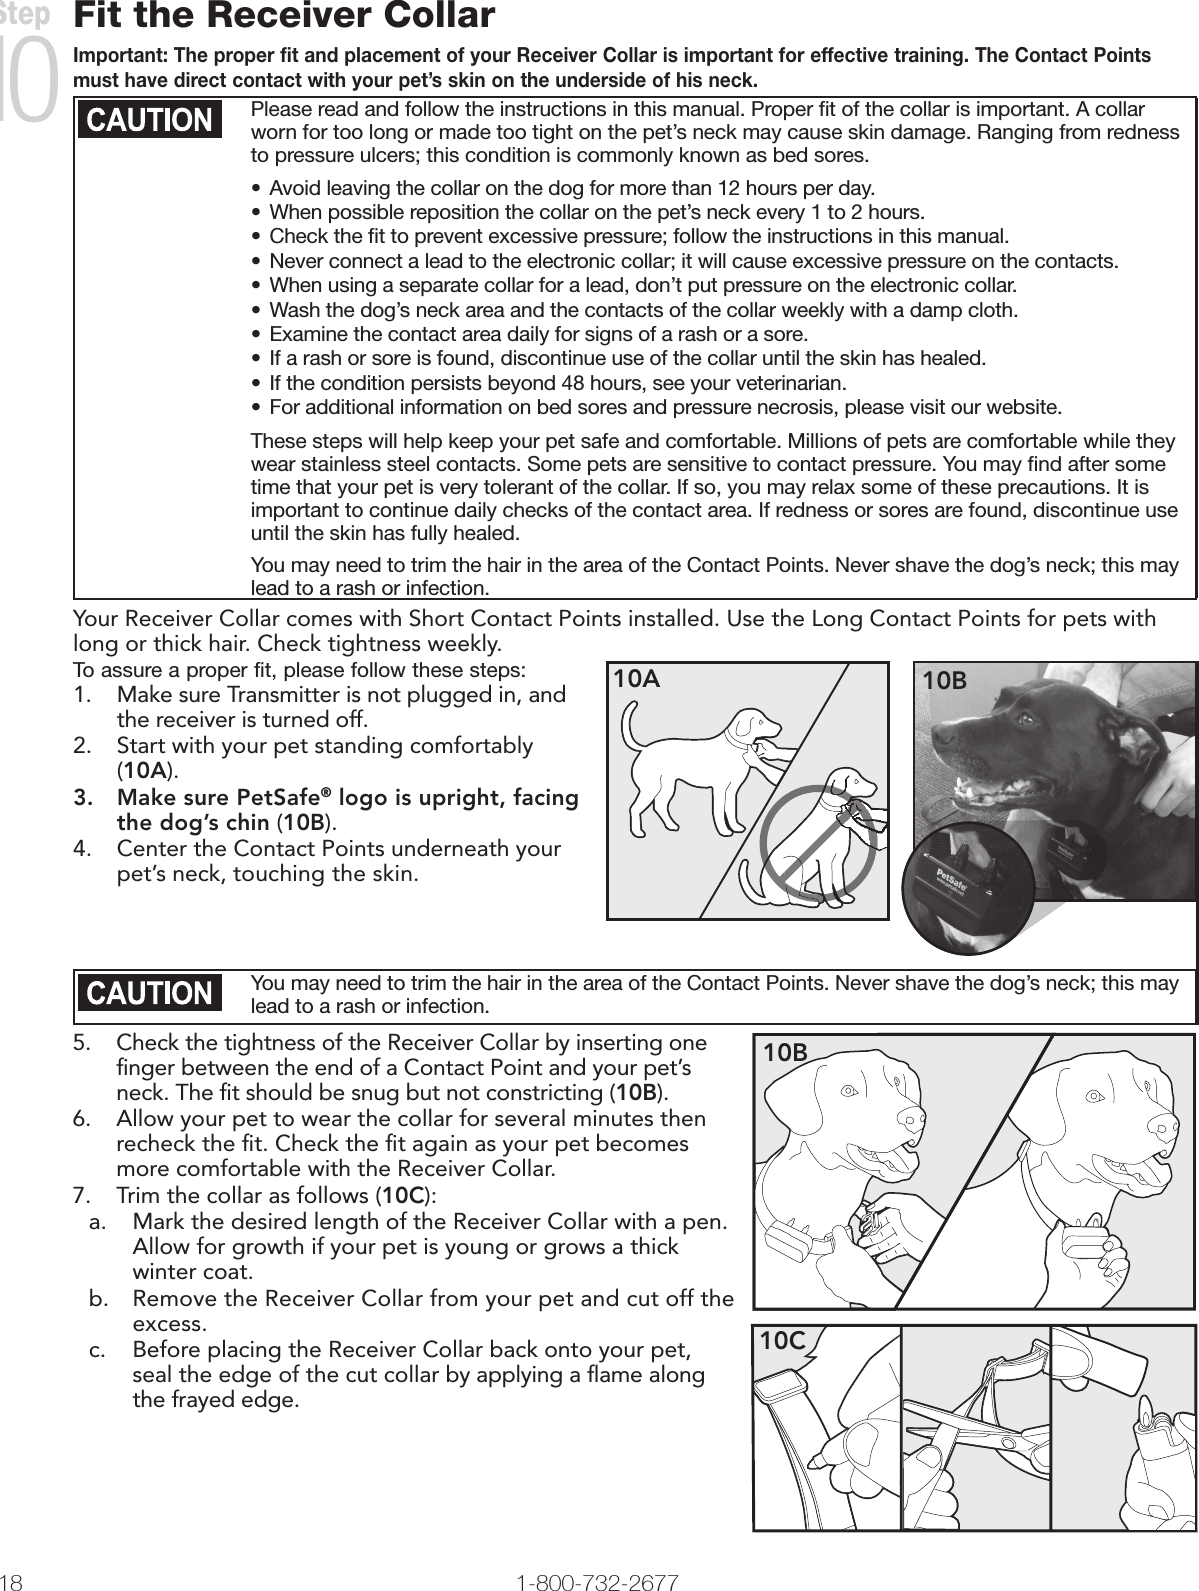 18 1-800-732-2677Fit the Receiver CollarImportant: The proper fit and placement of your Receiver Collar is important for effective training. The Contact Points must have direct contact with your pet’s skin on the underside of his neck. Please read and follow the instructions in this manual. Proper ﬁt of the collar is important. A collar worn for too long or made too tight on the pet’s neck may cause skin damage. Ranging from redness to pressure ulcers; this condition is commonly known as bed sores. • Avoid leaving the collar on the dog for more than 12 hours per day.• When possible reposition the collar on the pet’s neck every 1 to 2 hours.• Check the ﬁt to prevent excessive pressure; follow the instructions in this manual.• Never connect a lead to the electronic collar; it will cause excessive pressure on the contacts.• When using a separate collar for a lead, don’t put pressure on the electronic collar.• Wash the dog’s neck area and the contacts of the collar weekly with a damp cloth.• Examine the contact area daily for signs of a rash or a sore.• If a rash or sore is found, discontinue use of the collar until the skin has healed.• If the condition persists beyond 48 hours, see your veterinarian.• For additional information on bed sores and pressure necrosis, please visit our website.These steps will help keep your pet safe and comfortable. Millions of pets are comfortable while they wear stainless steel contacts. Some pets are sensitive to contact pressure. You may ﬁnd after some time that your pet is very tolerant of the collar. If so, you may relax some of these precautions. It is important to continue daily checks of the contact area. If redness or sores are found, discontinue use until the skin has fully healed.You may need to trim the hair in the area of the Contact Points. Never shave the dog’s neck; this may lead to a rash or infection.Your Receiver Collar comes with Short Contact Points installed. Use the Long Contact Points for pets with long or thick hair. Check tightness weekly.To assure a proper fit, please follow these steps:1.  Make sure Transmitter is not plugged in, and the receiver is turned off.2.  Start with your pet standing comfortably (10A).3.  Make sure PetSafe® logo is upright, facing the dog’s chin (10B).4.  Center the Contact Points underneath your pet’s neck, touching the skin.10B10AYou may need to trim the hair in the area of the Contact Points. Never shave the dog’s neck; this may lead to a rash or infection.5.  Check the tightness of the Receiver Collar by inserting one ﬁnger between the end of a Contact Point and your pet’s neck. The ﬁt should be snug but not constricting (10B).6.  Allow your pet to wear the collar for several minutes then recheck the ﬁt. Check the ﬁt again as your pet becomes more comfortable with the Receiver Collar.7.  Trim the collar as follows (10C):a.  Mark the desired length of the Receiver Collar with a pen. Allow for growth if your pet is young or grows a thick winter coat.b.  Remove the Receiver Collar from your pet and cut off the excess. c.  Before placing the Receiver Collar back onto your pet, seal the edge of the cut collar by applying a ﬂame along the frayed edge.10C10BStep 10